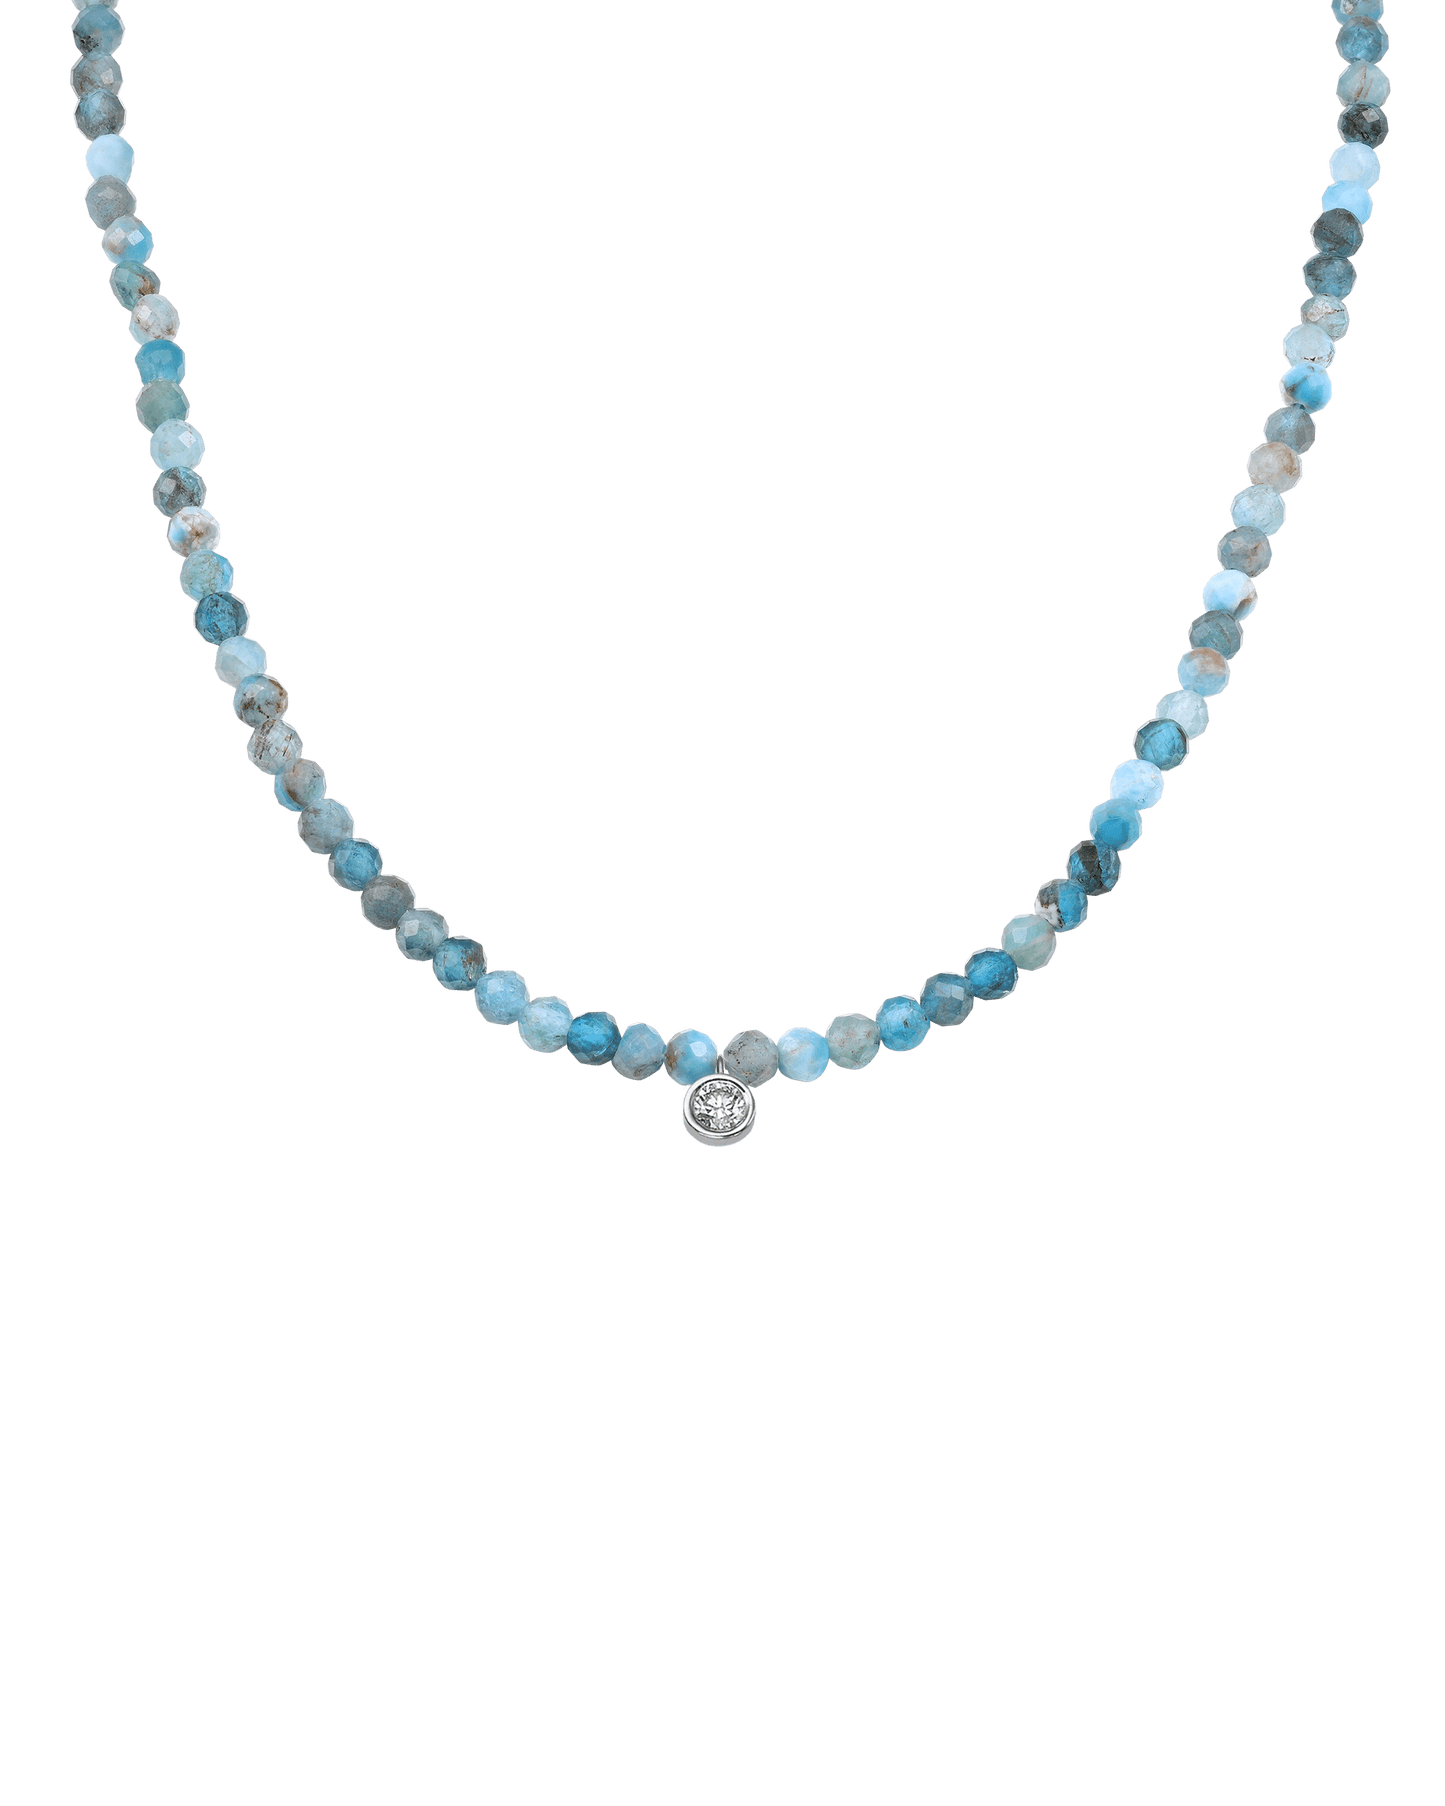 Apatite Gemstone & Diamond Necklace - 14K White Gold Necklaces 14K Solid Gold Natural Turquoise Large: 0.10ct 14"